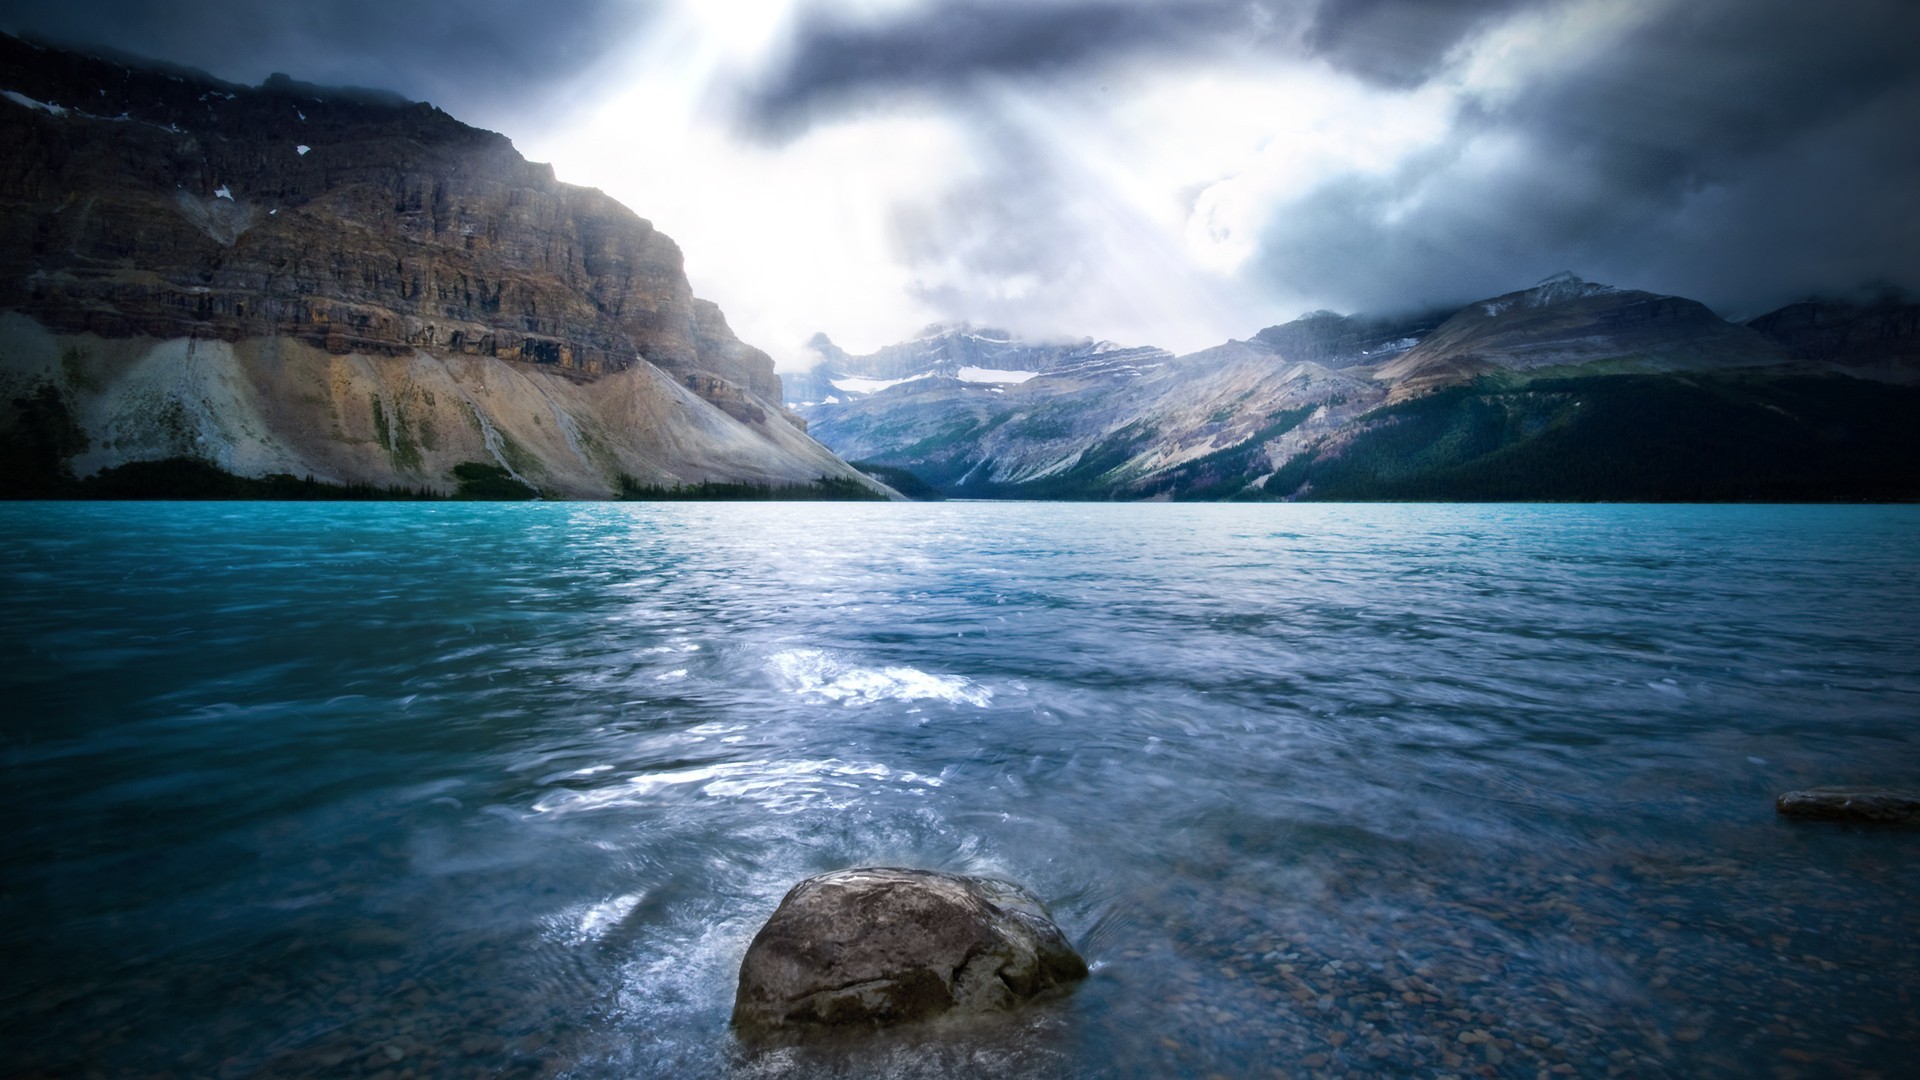 General 1920x1080 landscape nature Bow Lake Canada water mountains Banff National Park rocks